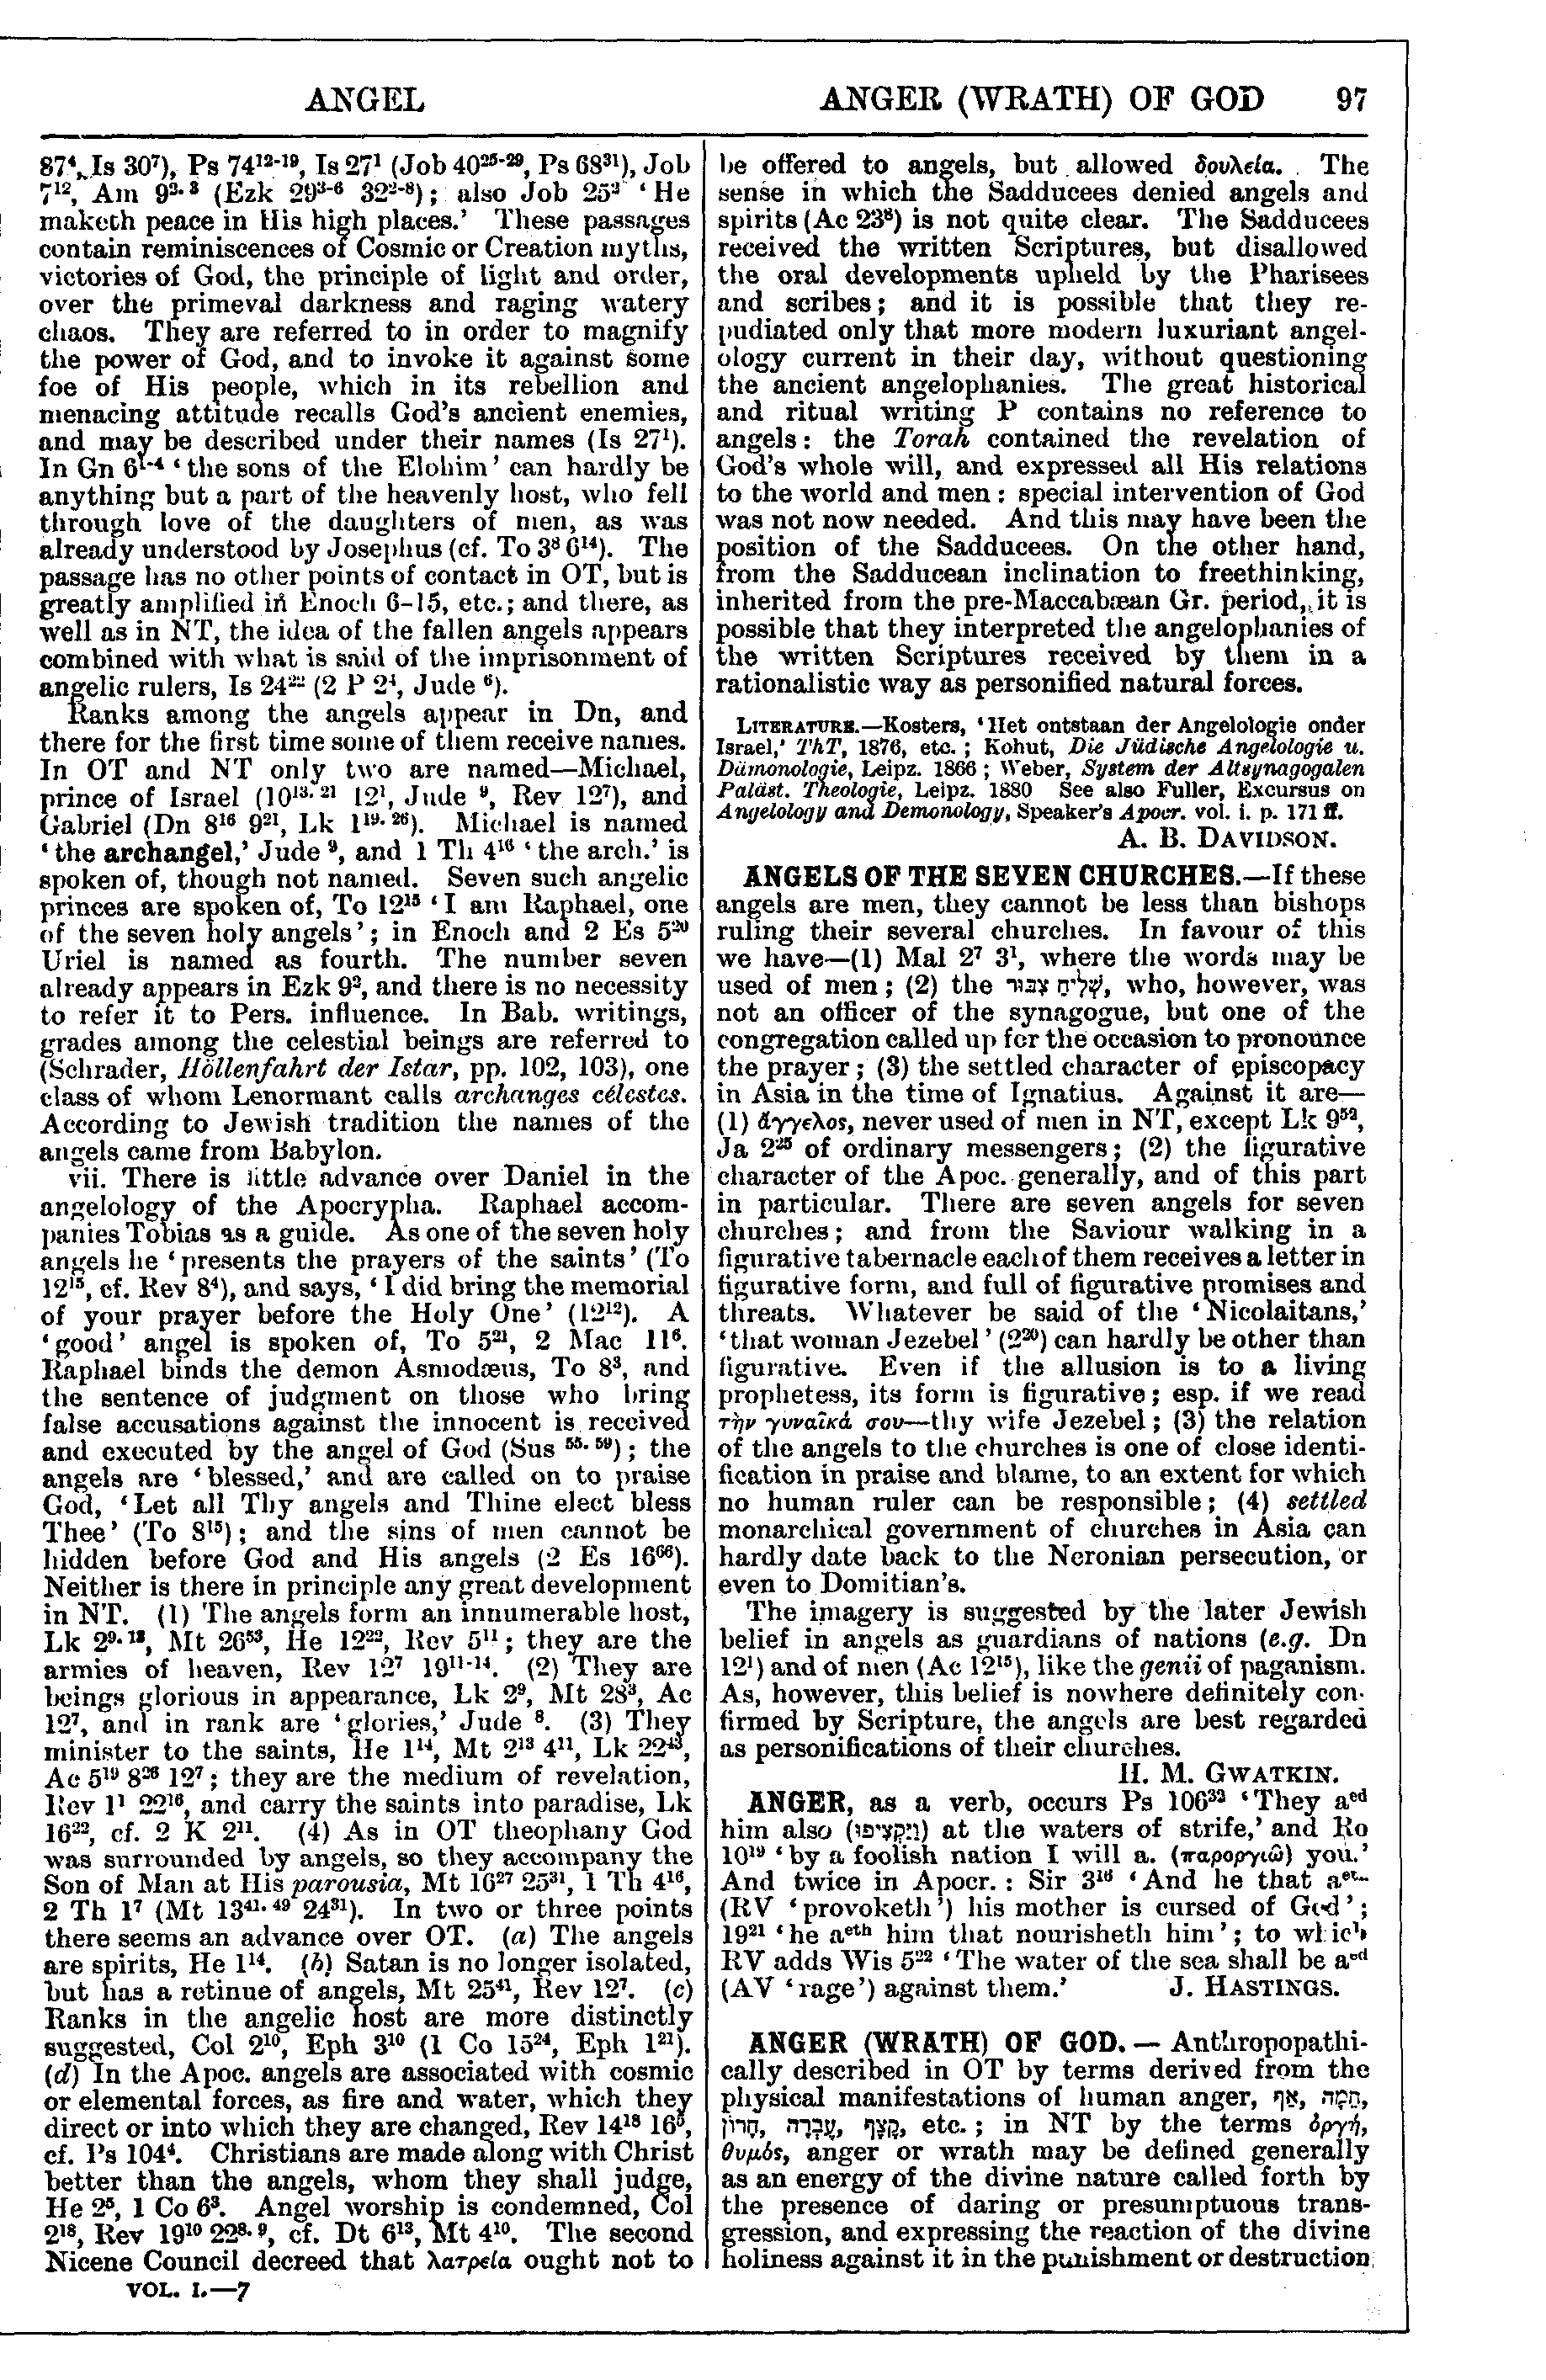 Image of page 97